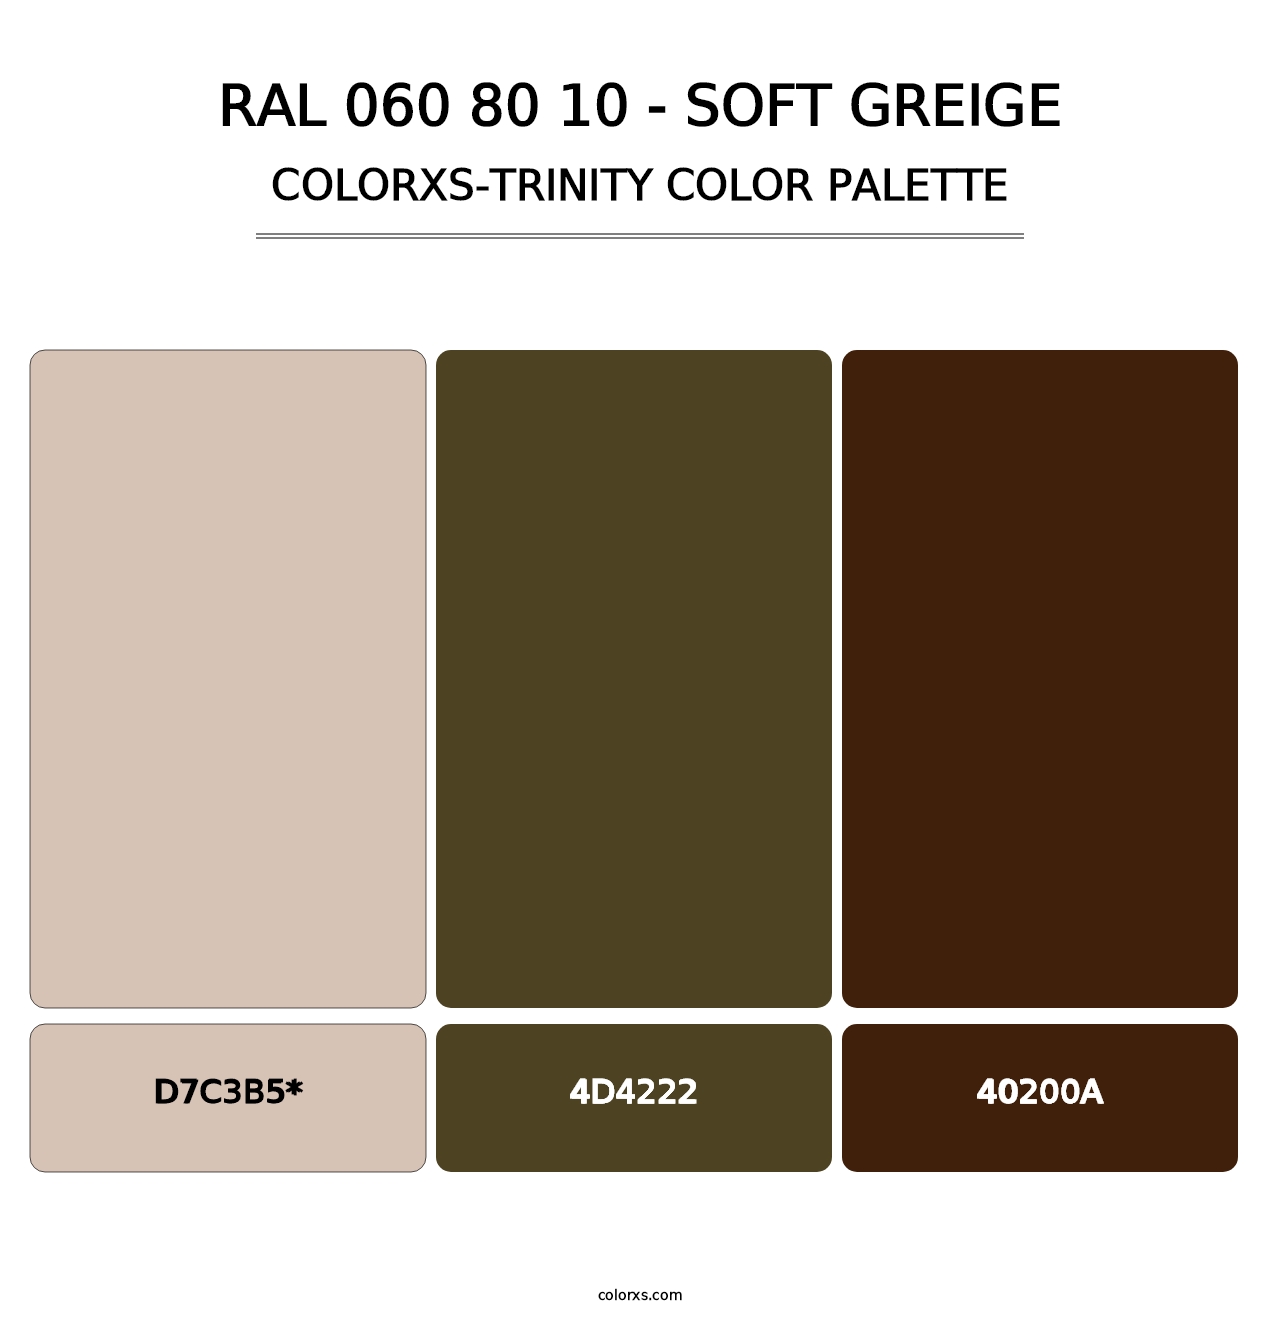 RAL 060 80 10 - Soft Greige - Colorxs Trinity Palette